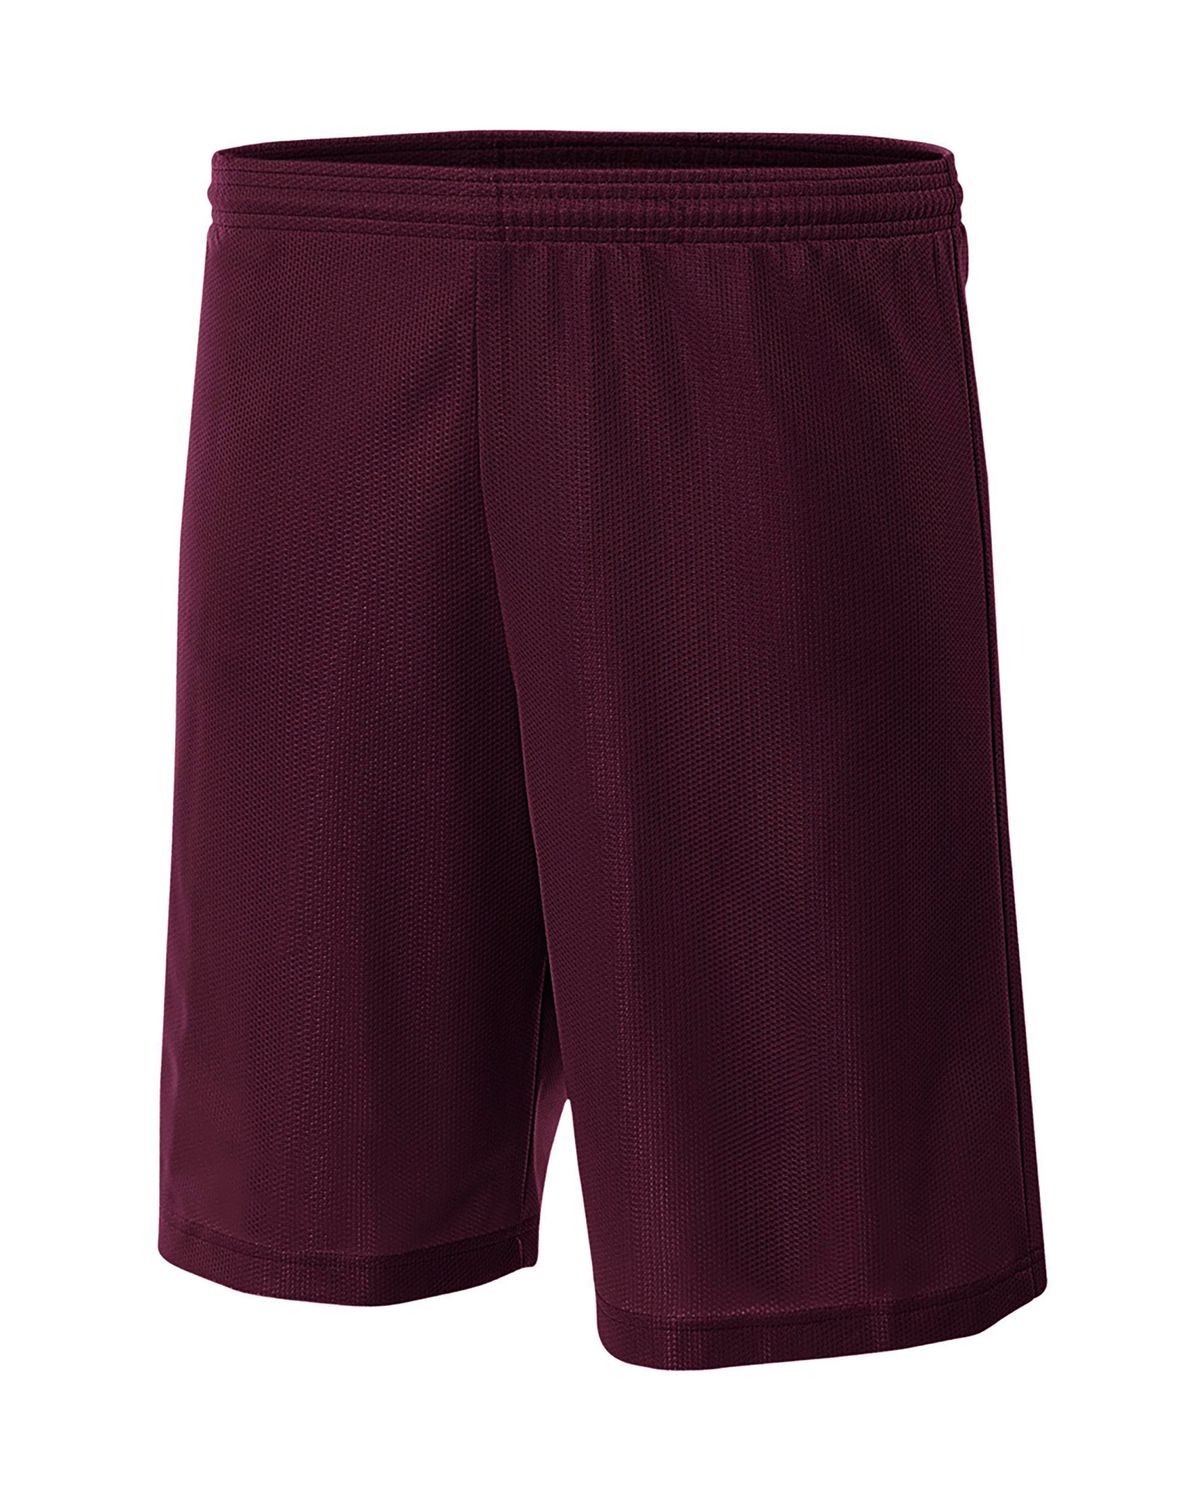 'A4 N5184 Men's 7 Inseam Lined Micro Mesh Shorts'